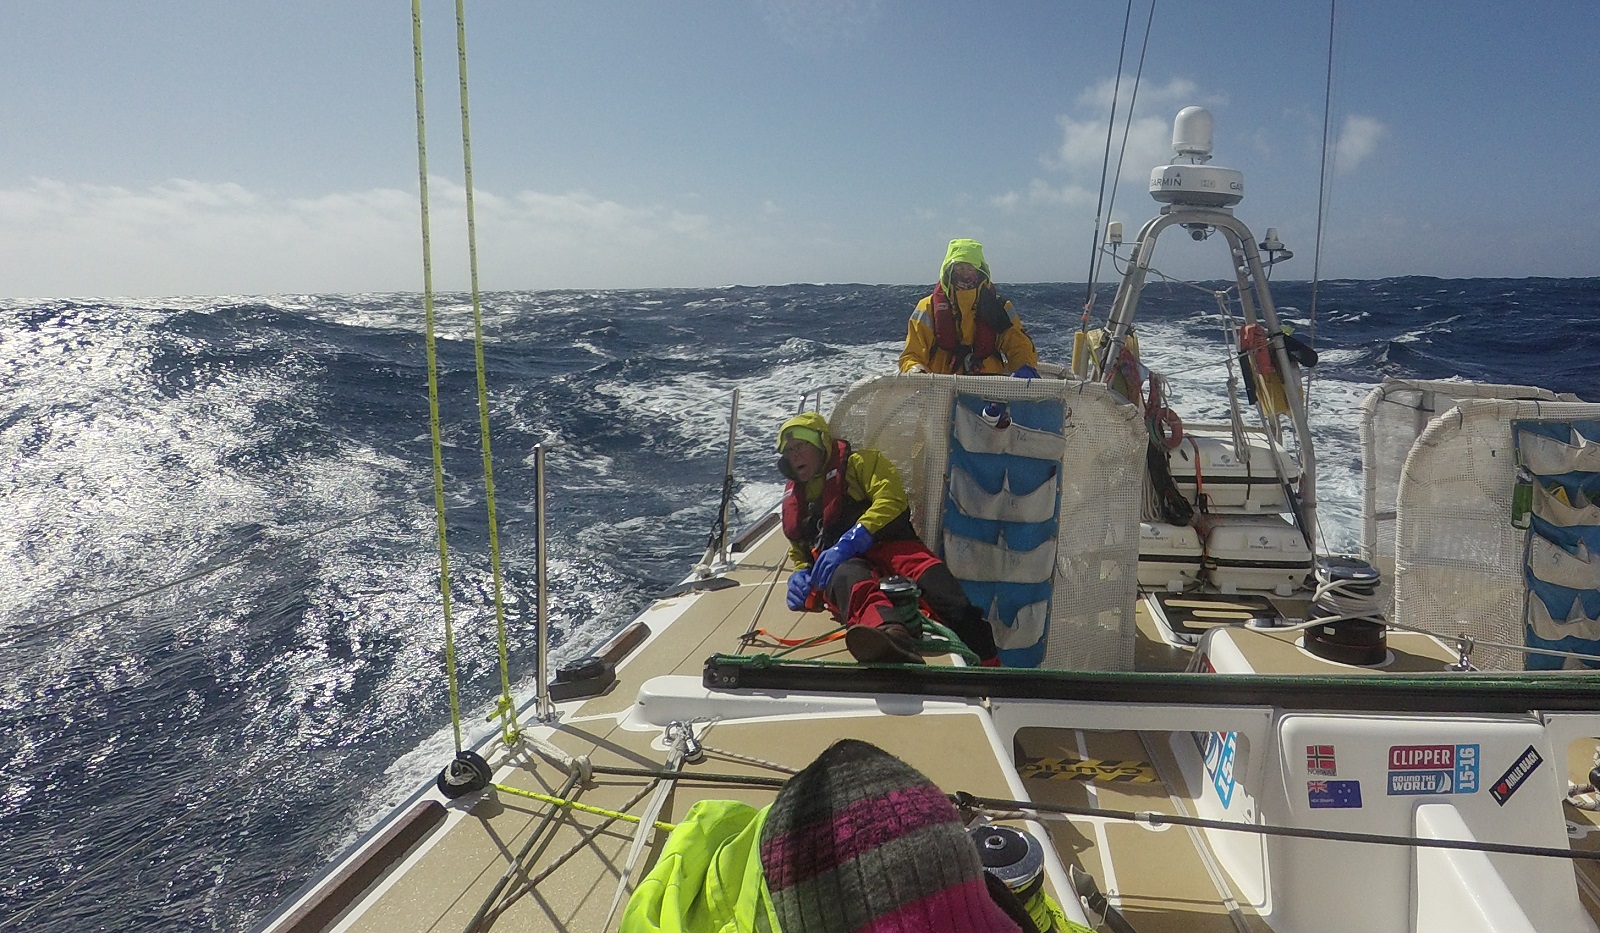 Crew shown helming in sunny, moderate conditions at sea 